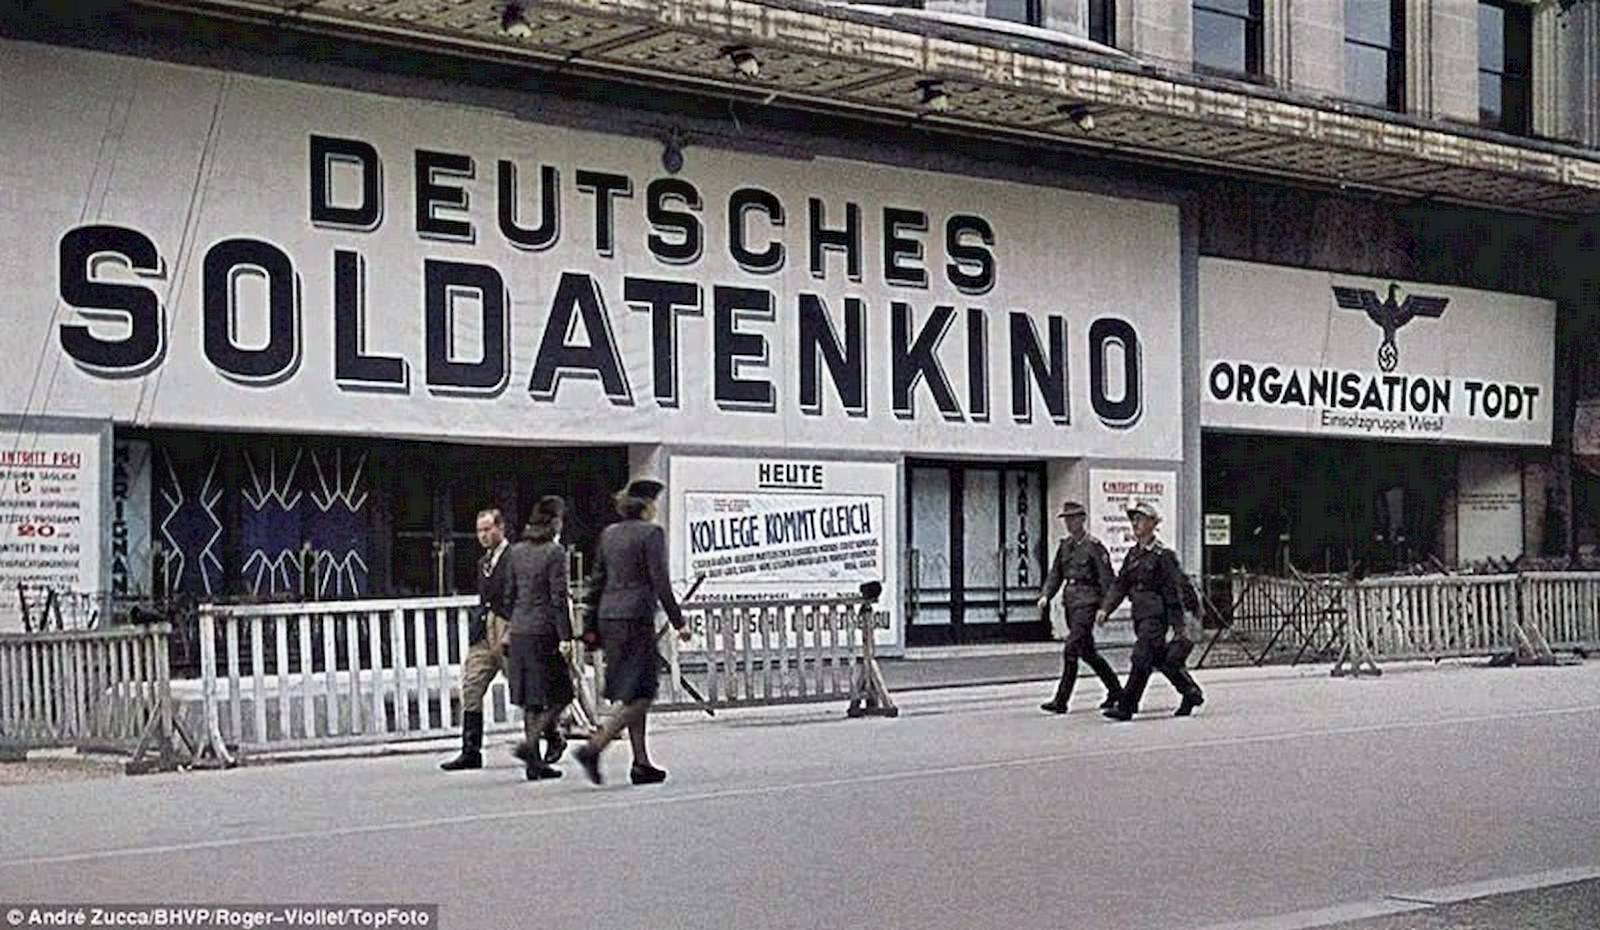 A theatre, which has an Imperial Eagle painted on its wall, proclaims itself as a German soldier’s cinema (Deutsches Soldatenkino).